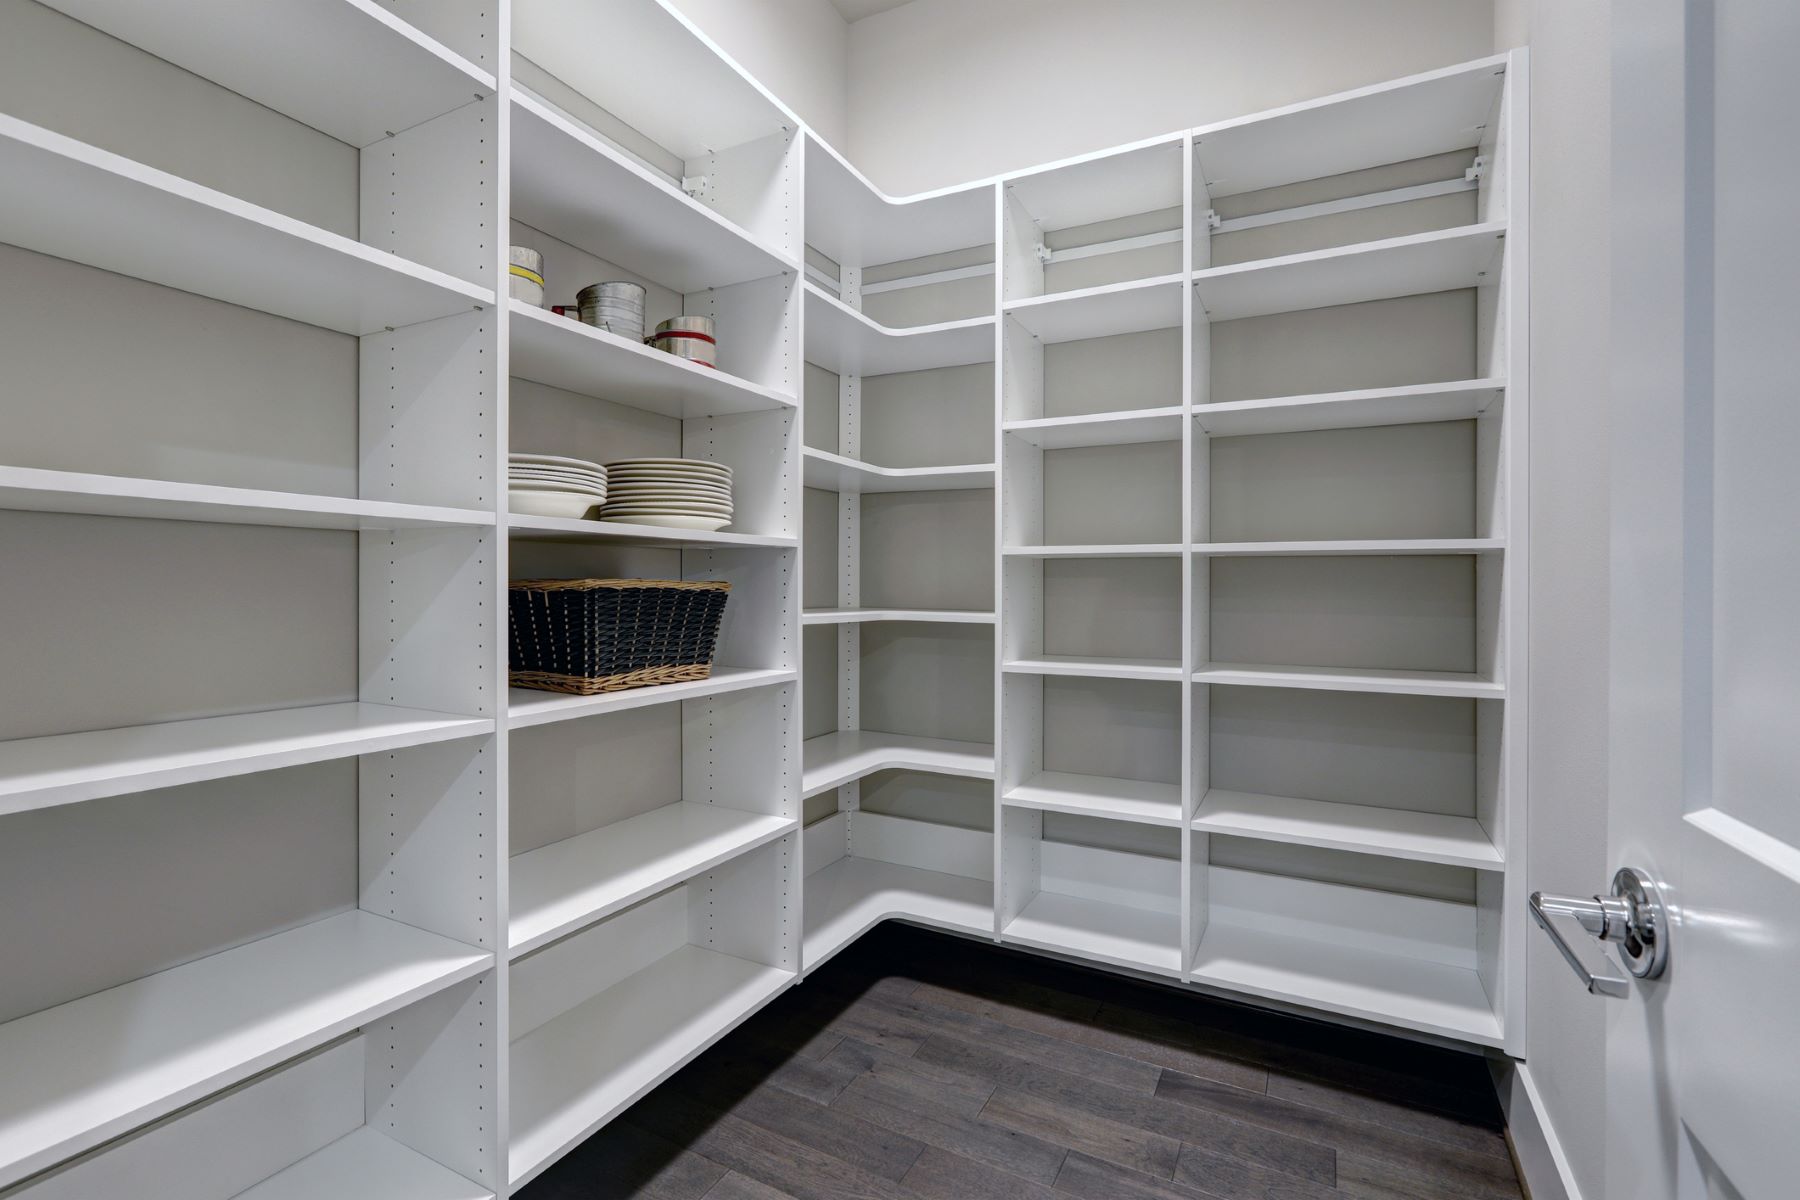 Pantry Shelving Installation, How To Install Pantry Shelves